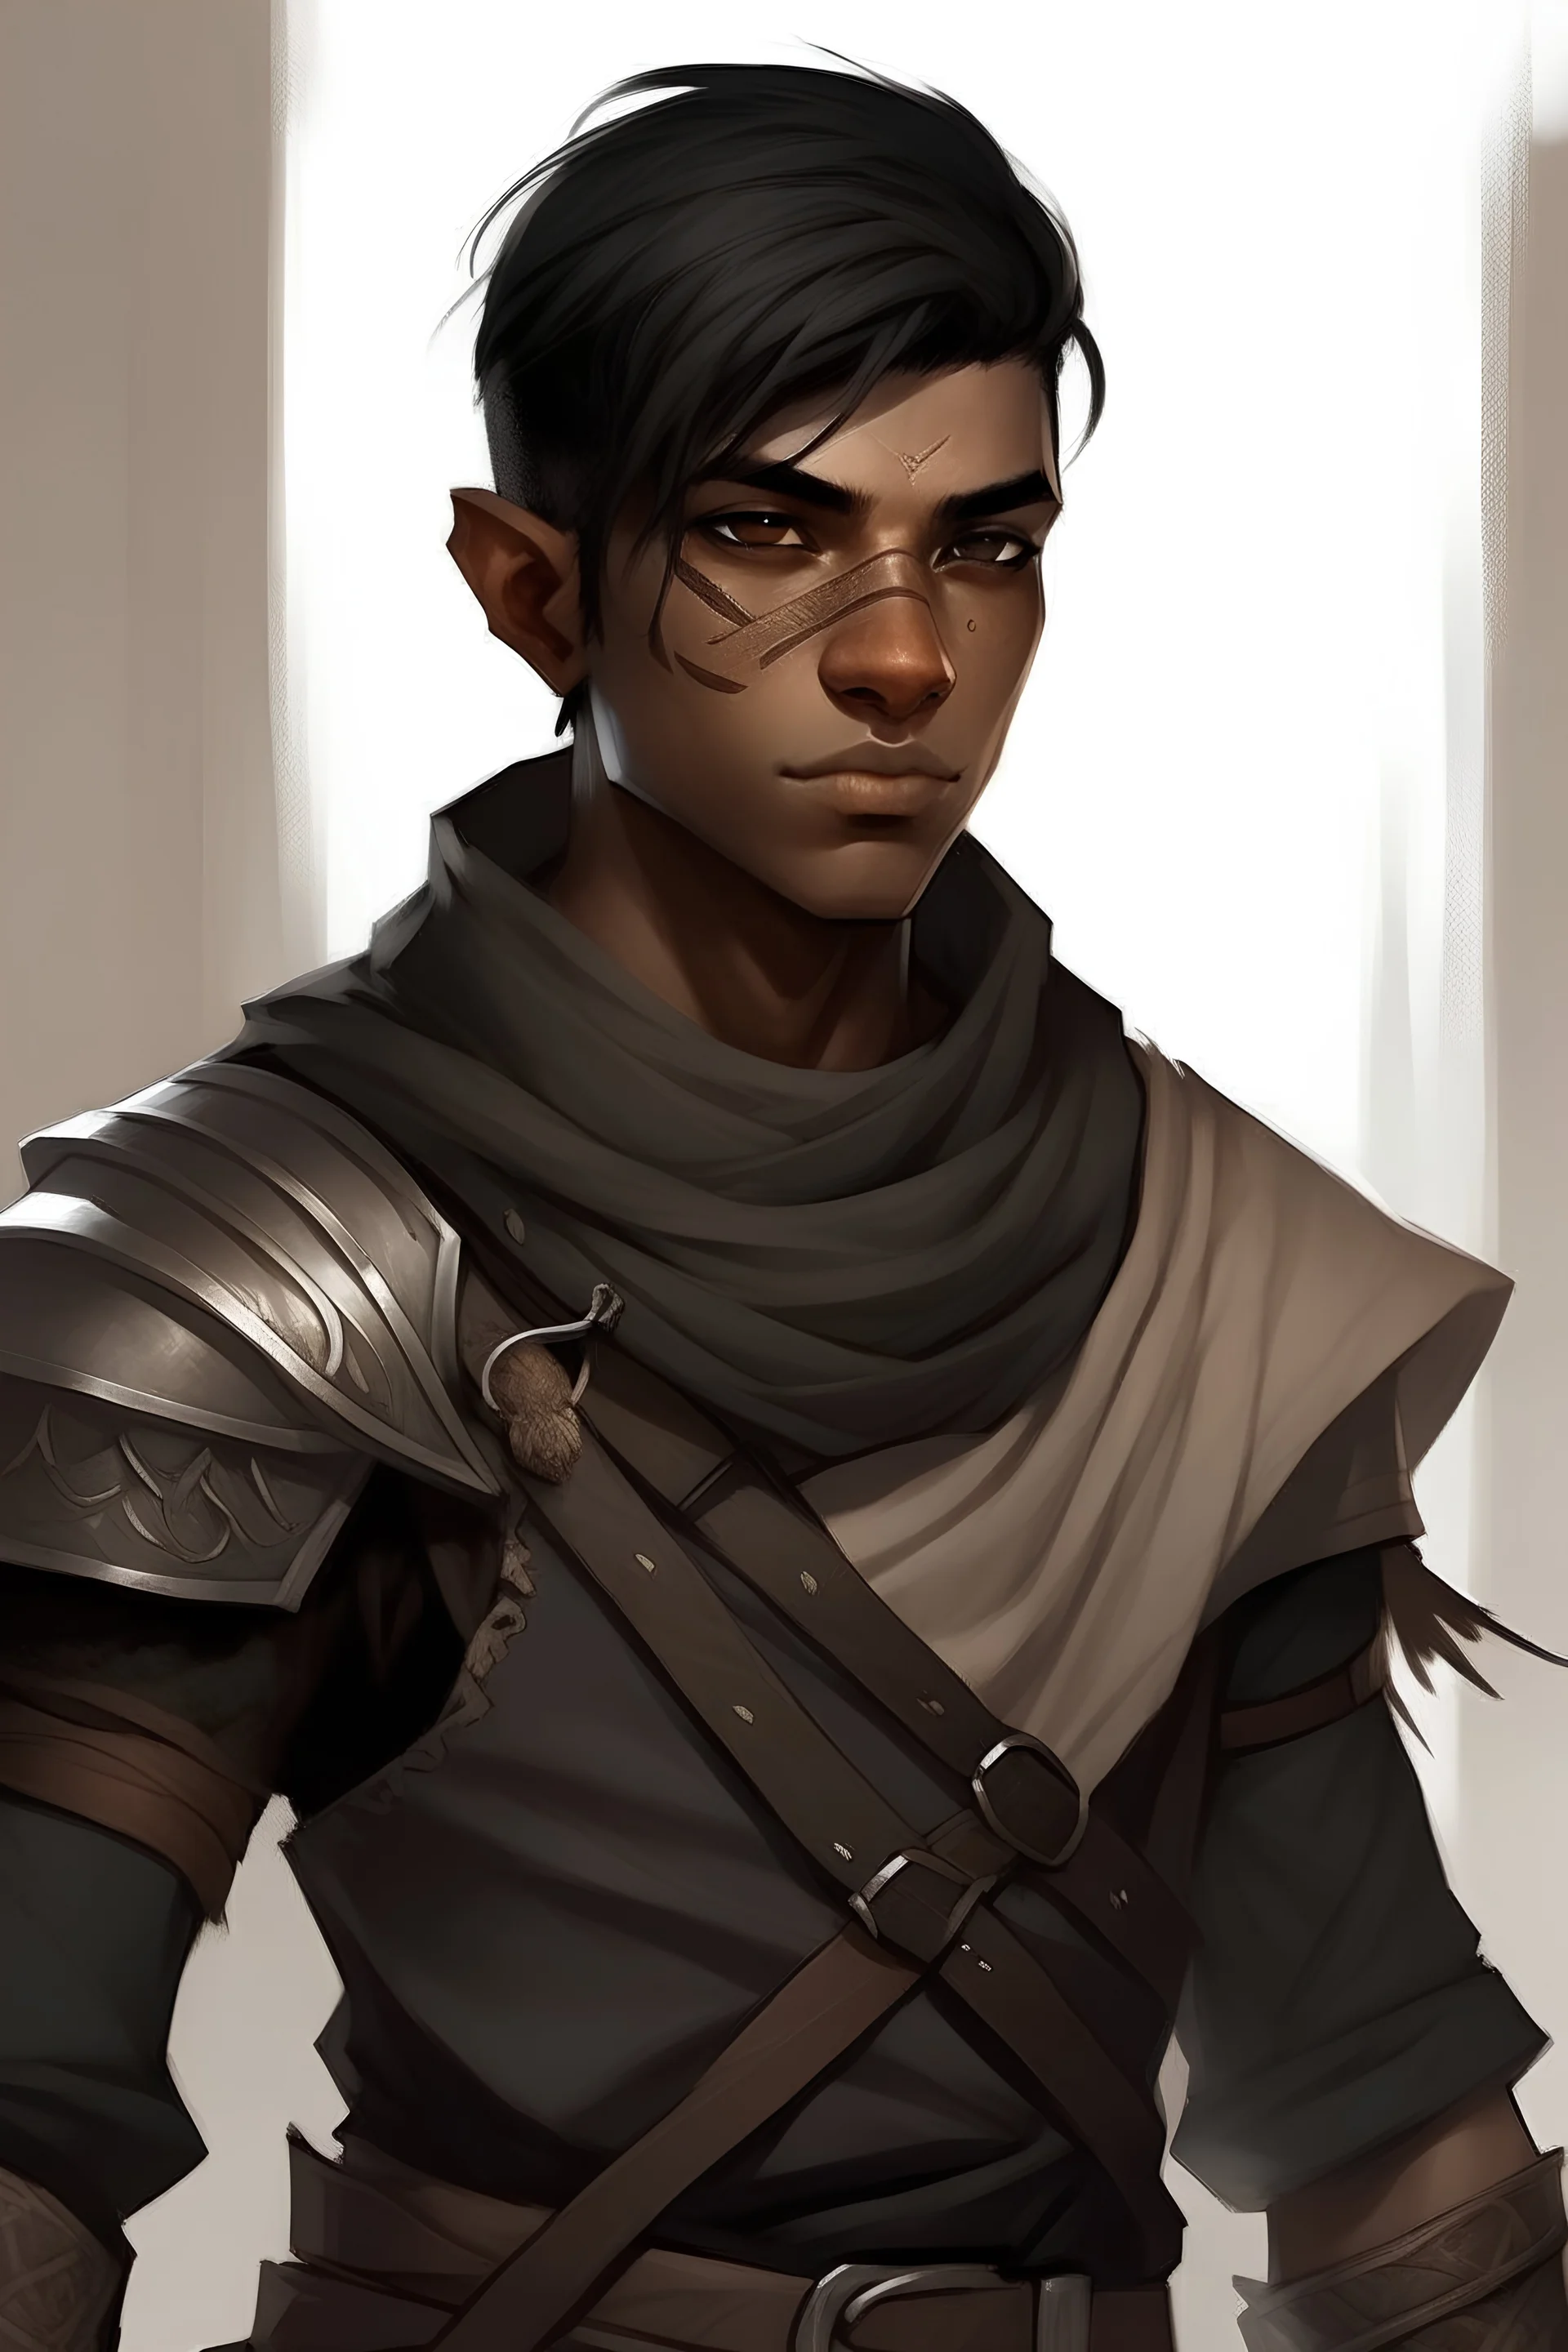 DND young male human rogue assassin, from east desert kalimshan, tanned skin, very short black hair, scars on face